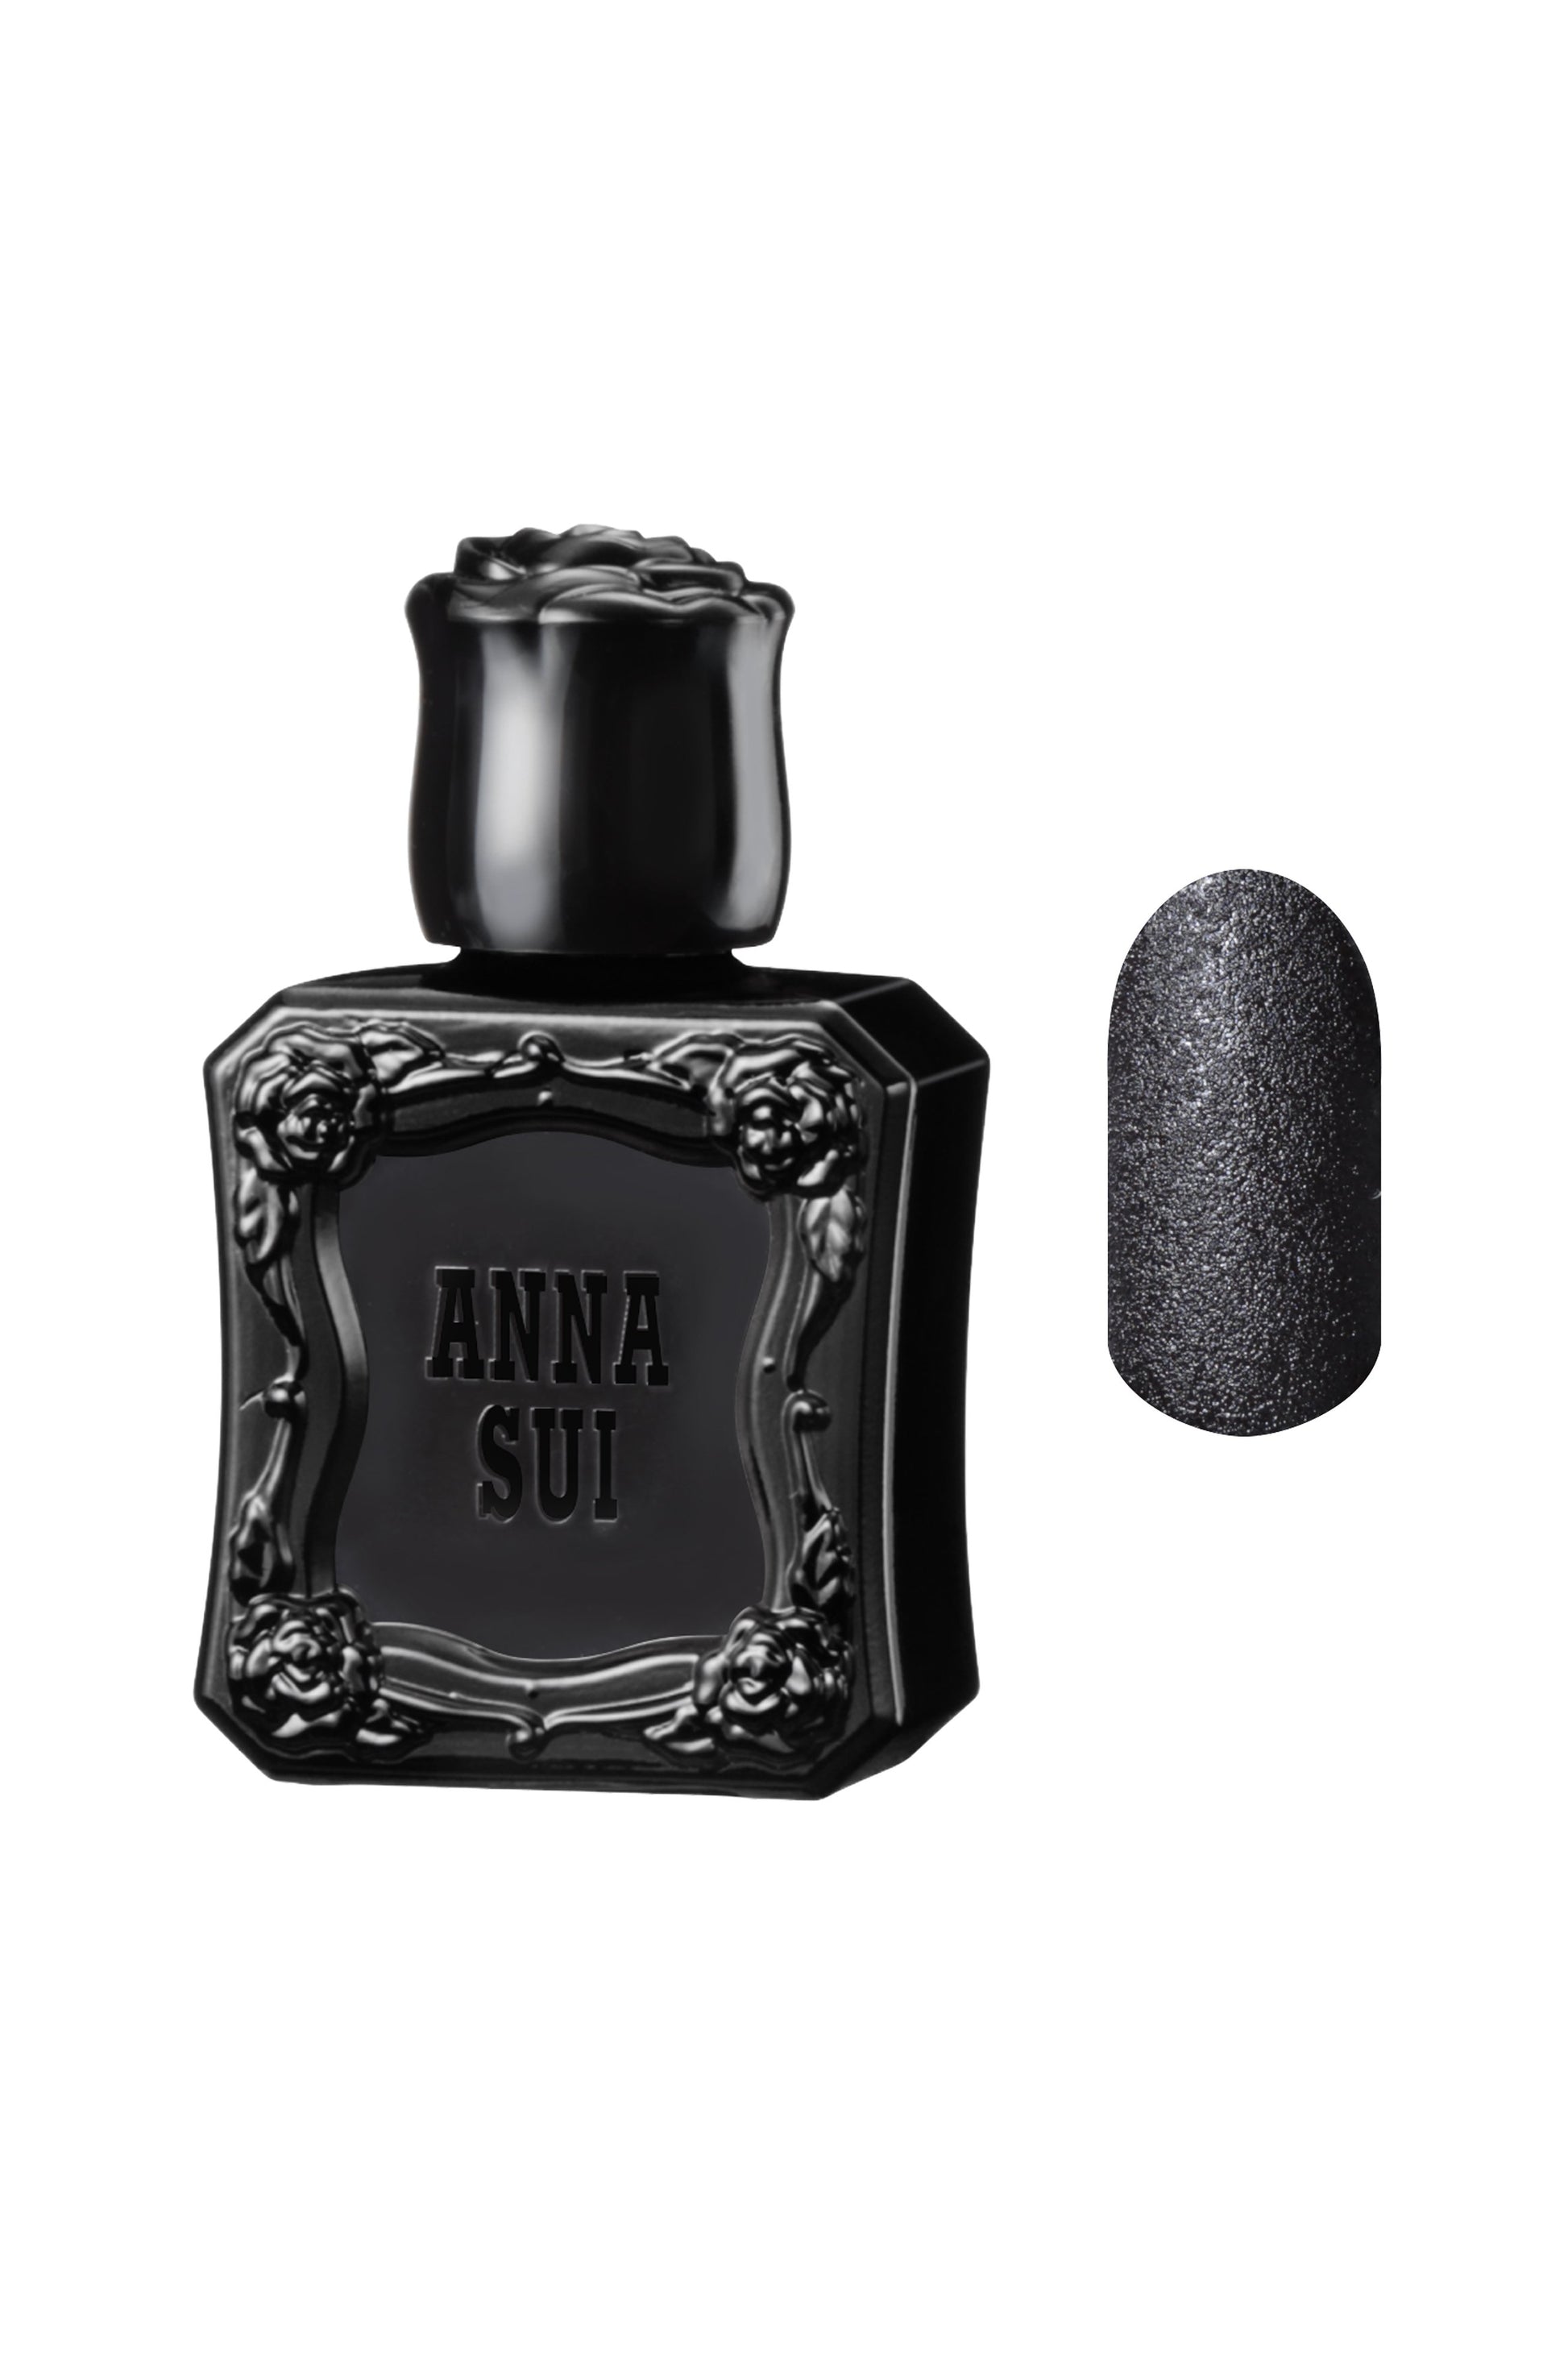 LEATHER BLACK Nail Polish bottle raised rose pattern, Anna Sui in black over nail colors in front